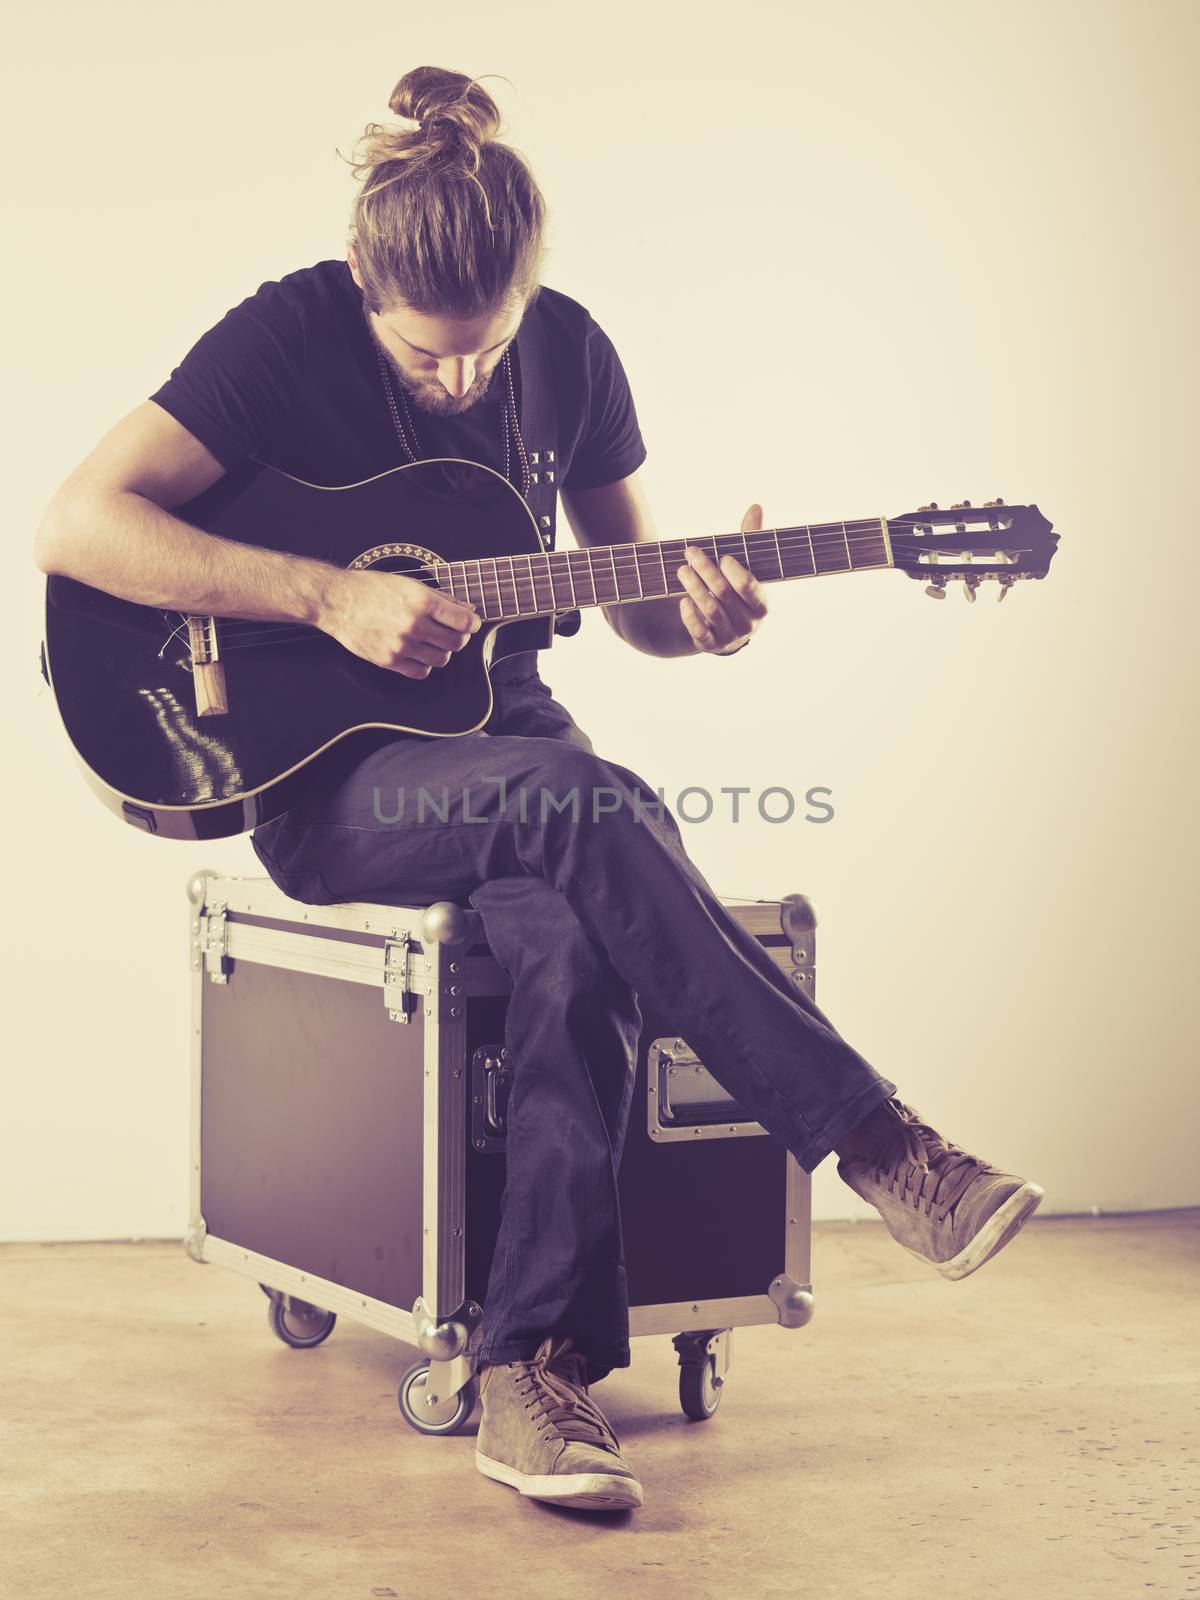 Photo of a young attractive man with long hair and beard sitting on a flight case and playing an acoustic guitar. Filtered to look vintage.
